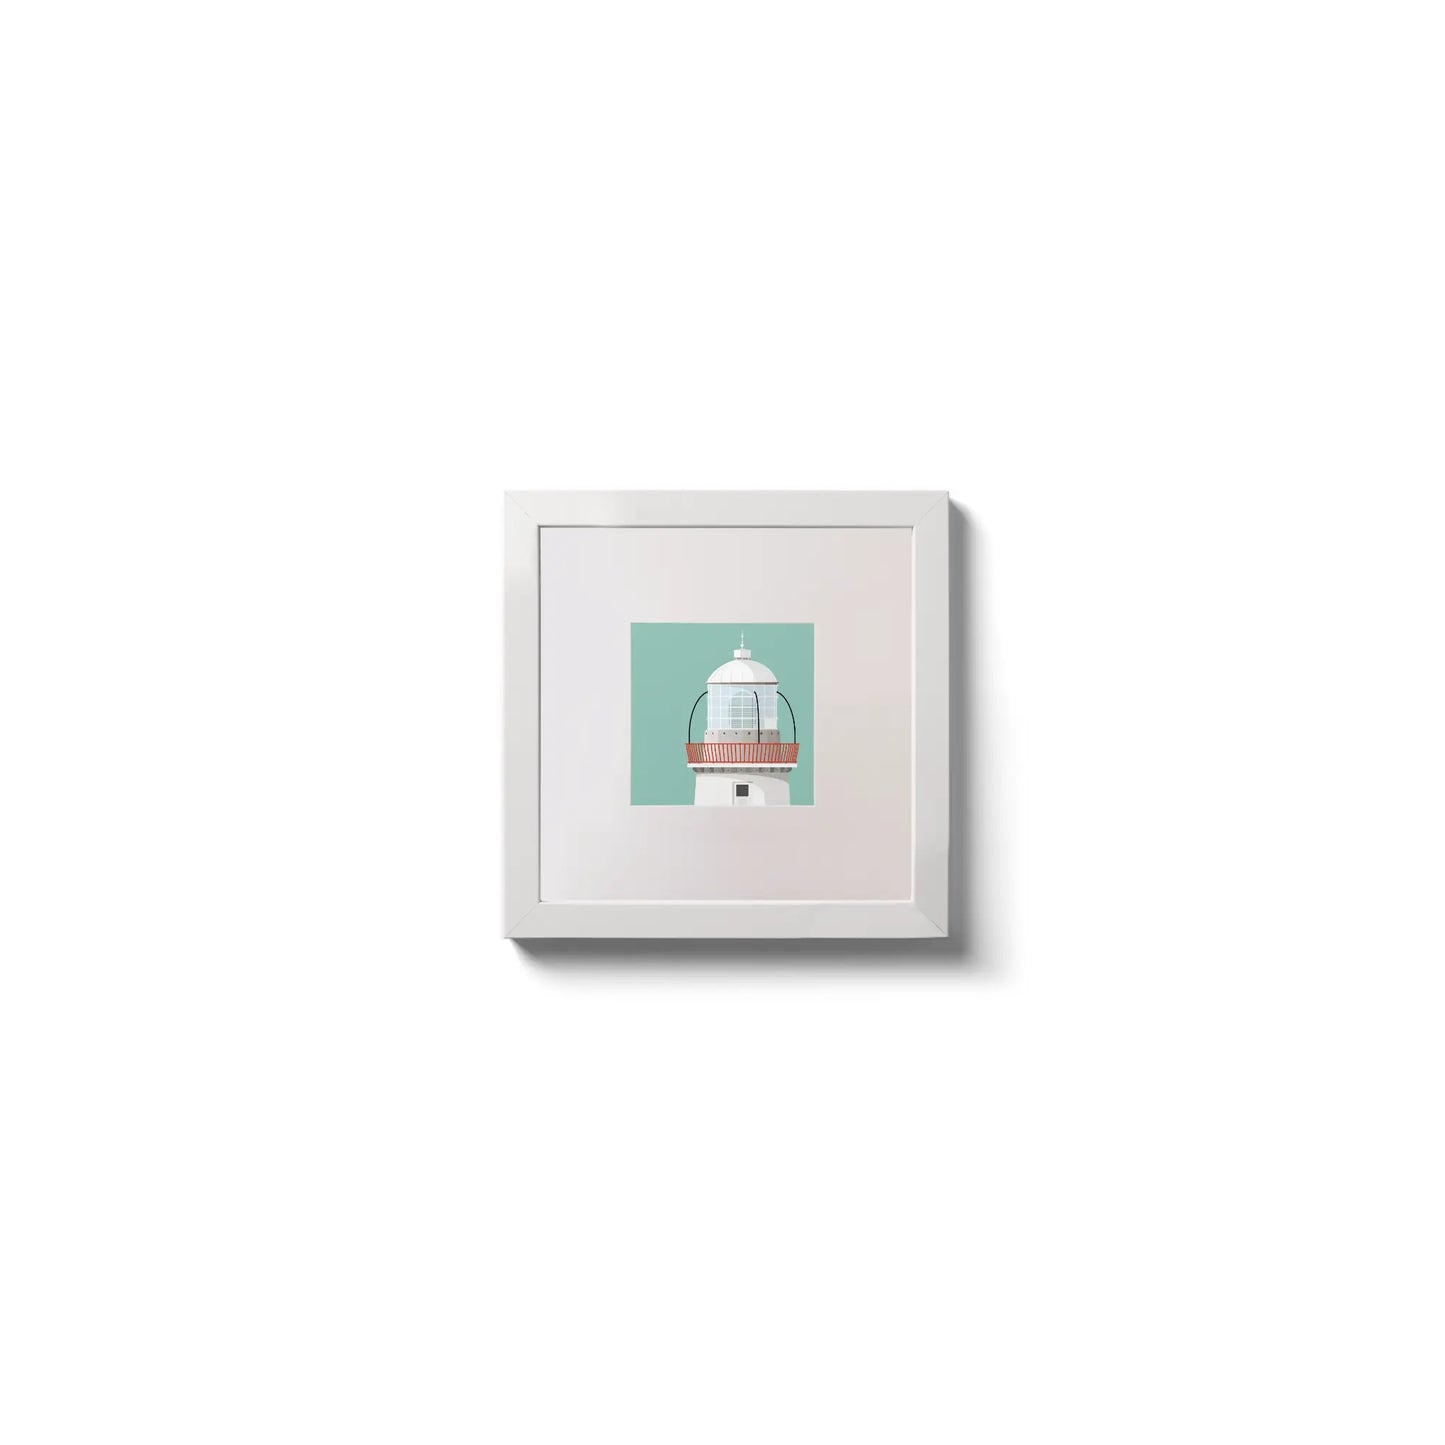 Illustration Eagle Island lighthouse on an ocean green background,  in a white square frame measuring 10x10cm.